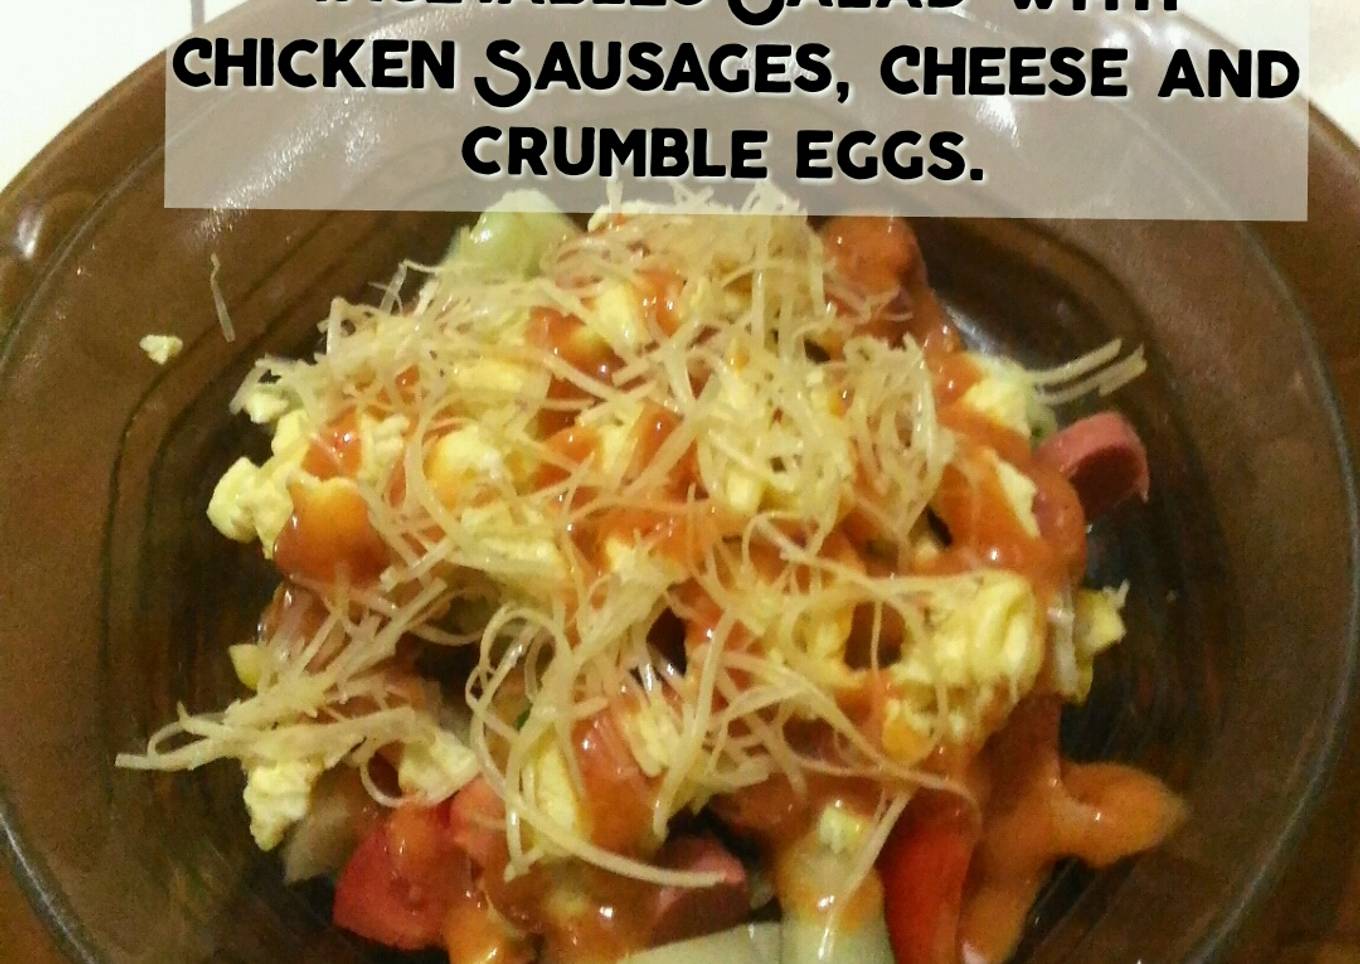 Vegetables Salad with Chicken Sausage, Cheese and Crumble eggs